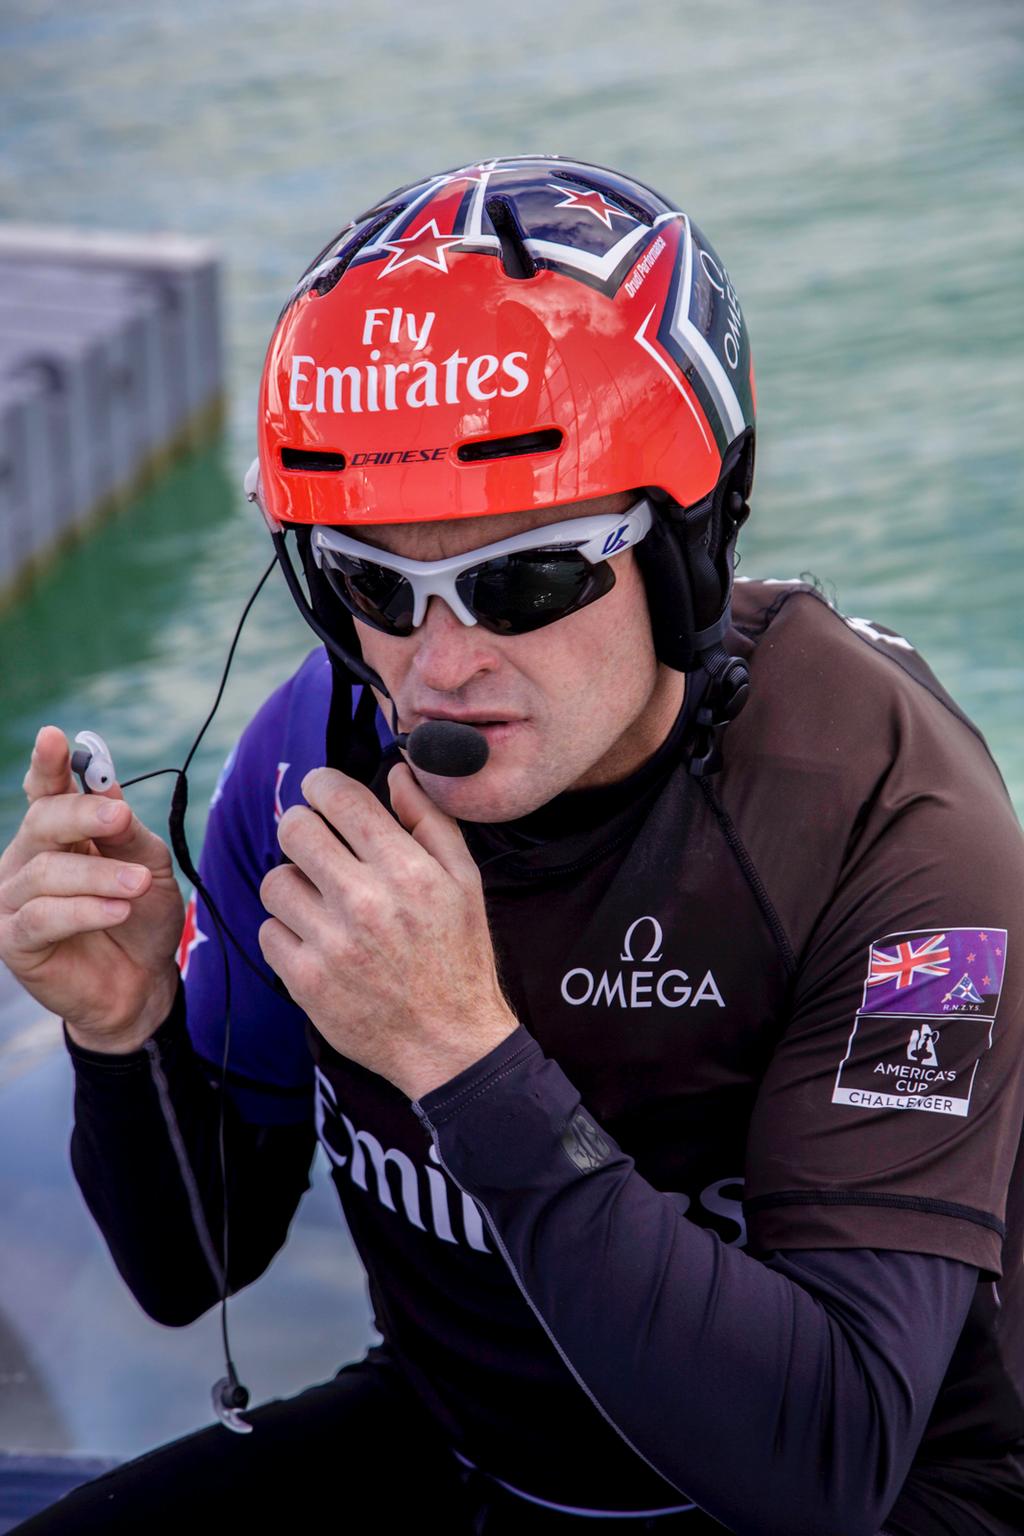 Aldo Drudi designed Emirates Team New Zealand race helmets to be worn by the New Zealand team for the 35th America’s Cup © Hamish Hooper/Emirates Team NZ http://www.etnzblog.com